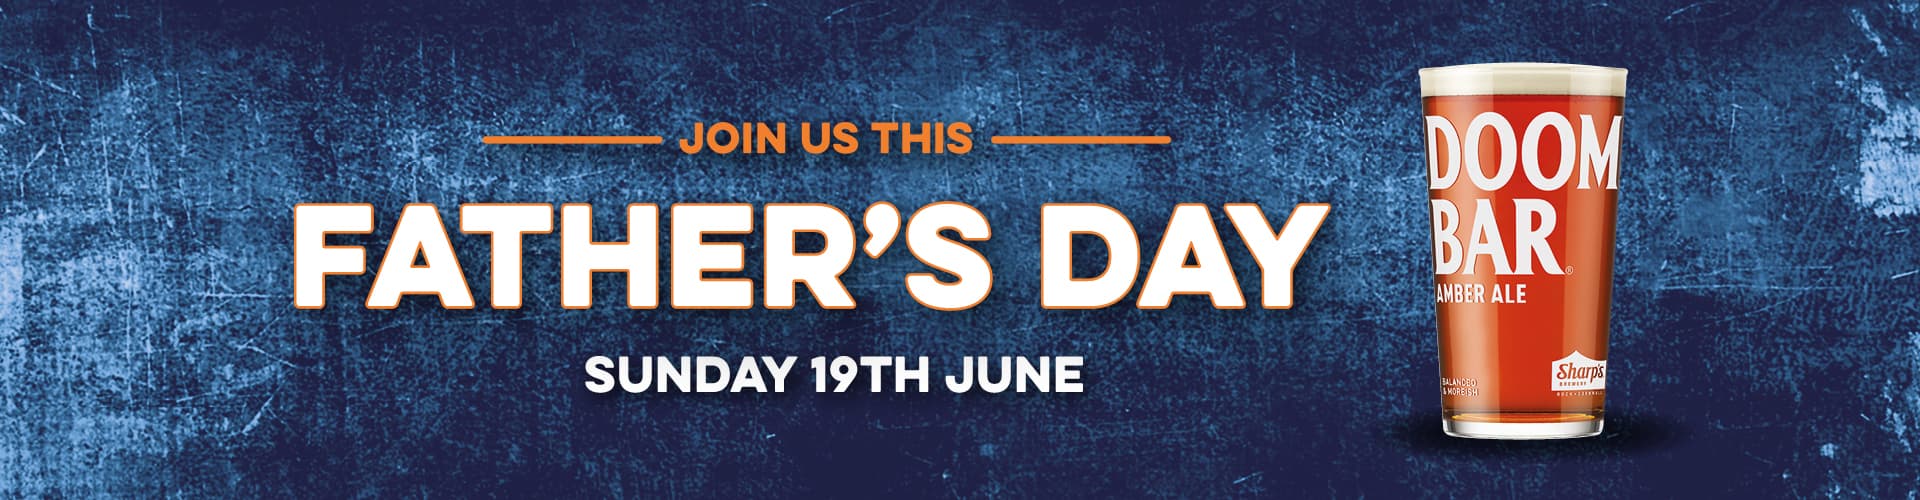 Father's Day at The Old Bank pub in Grantham